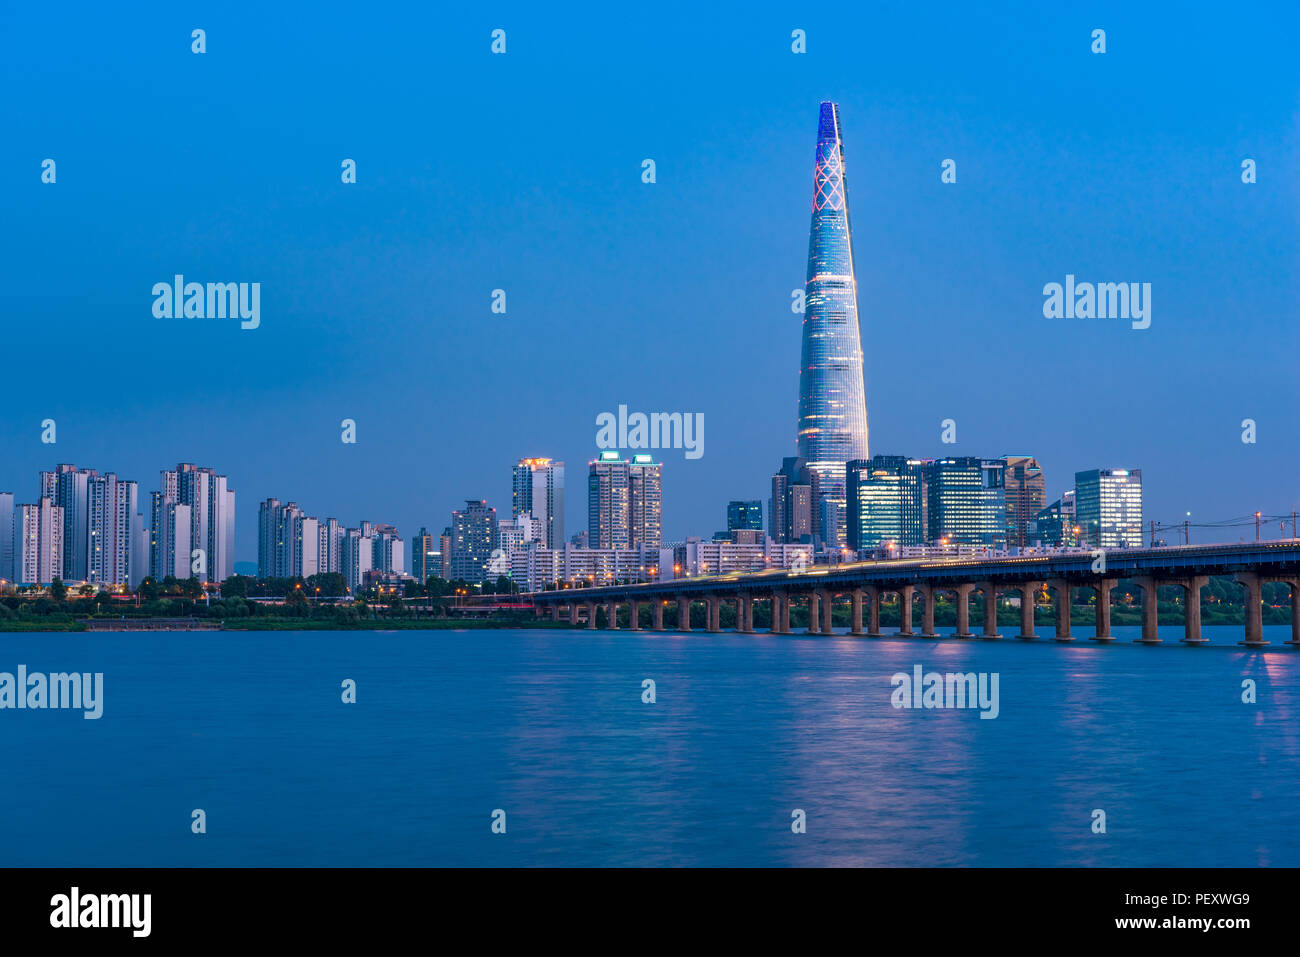 Jamsil railway bridge crossing the Han River and Lotte World Tower in Seoul capital city of South Korea Stock Photo